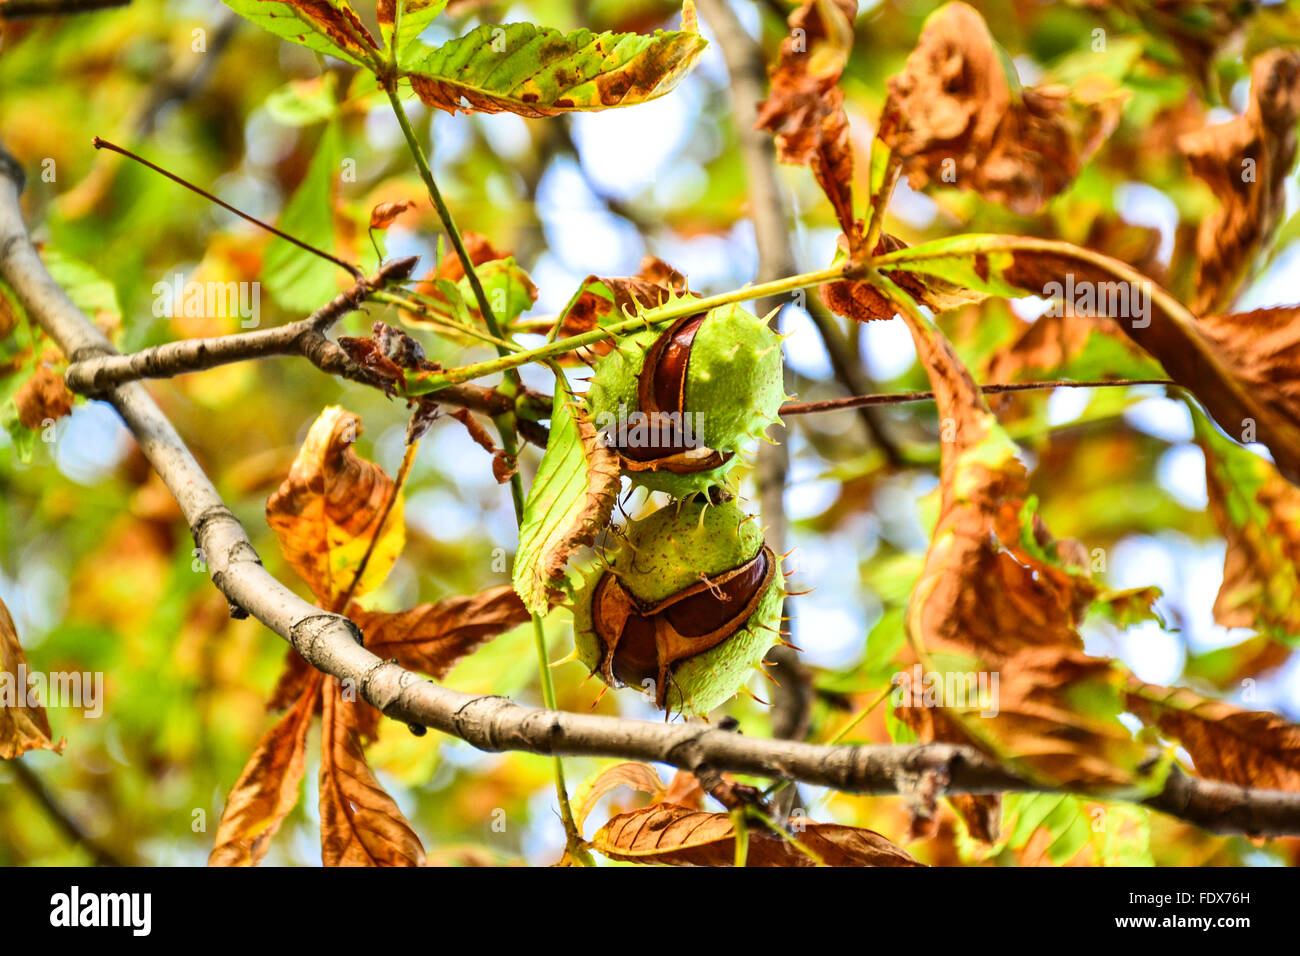 Two ajar chestnuts growing on the tree Stock Photo